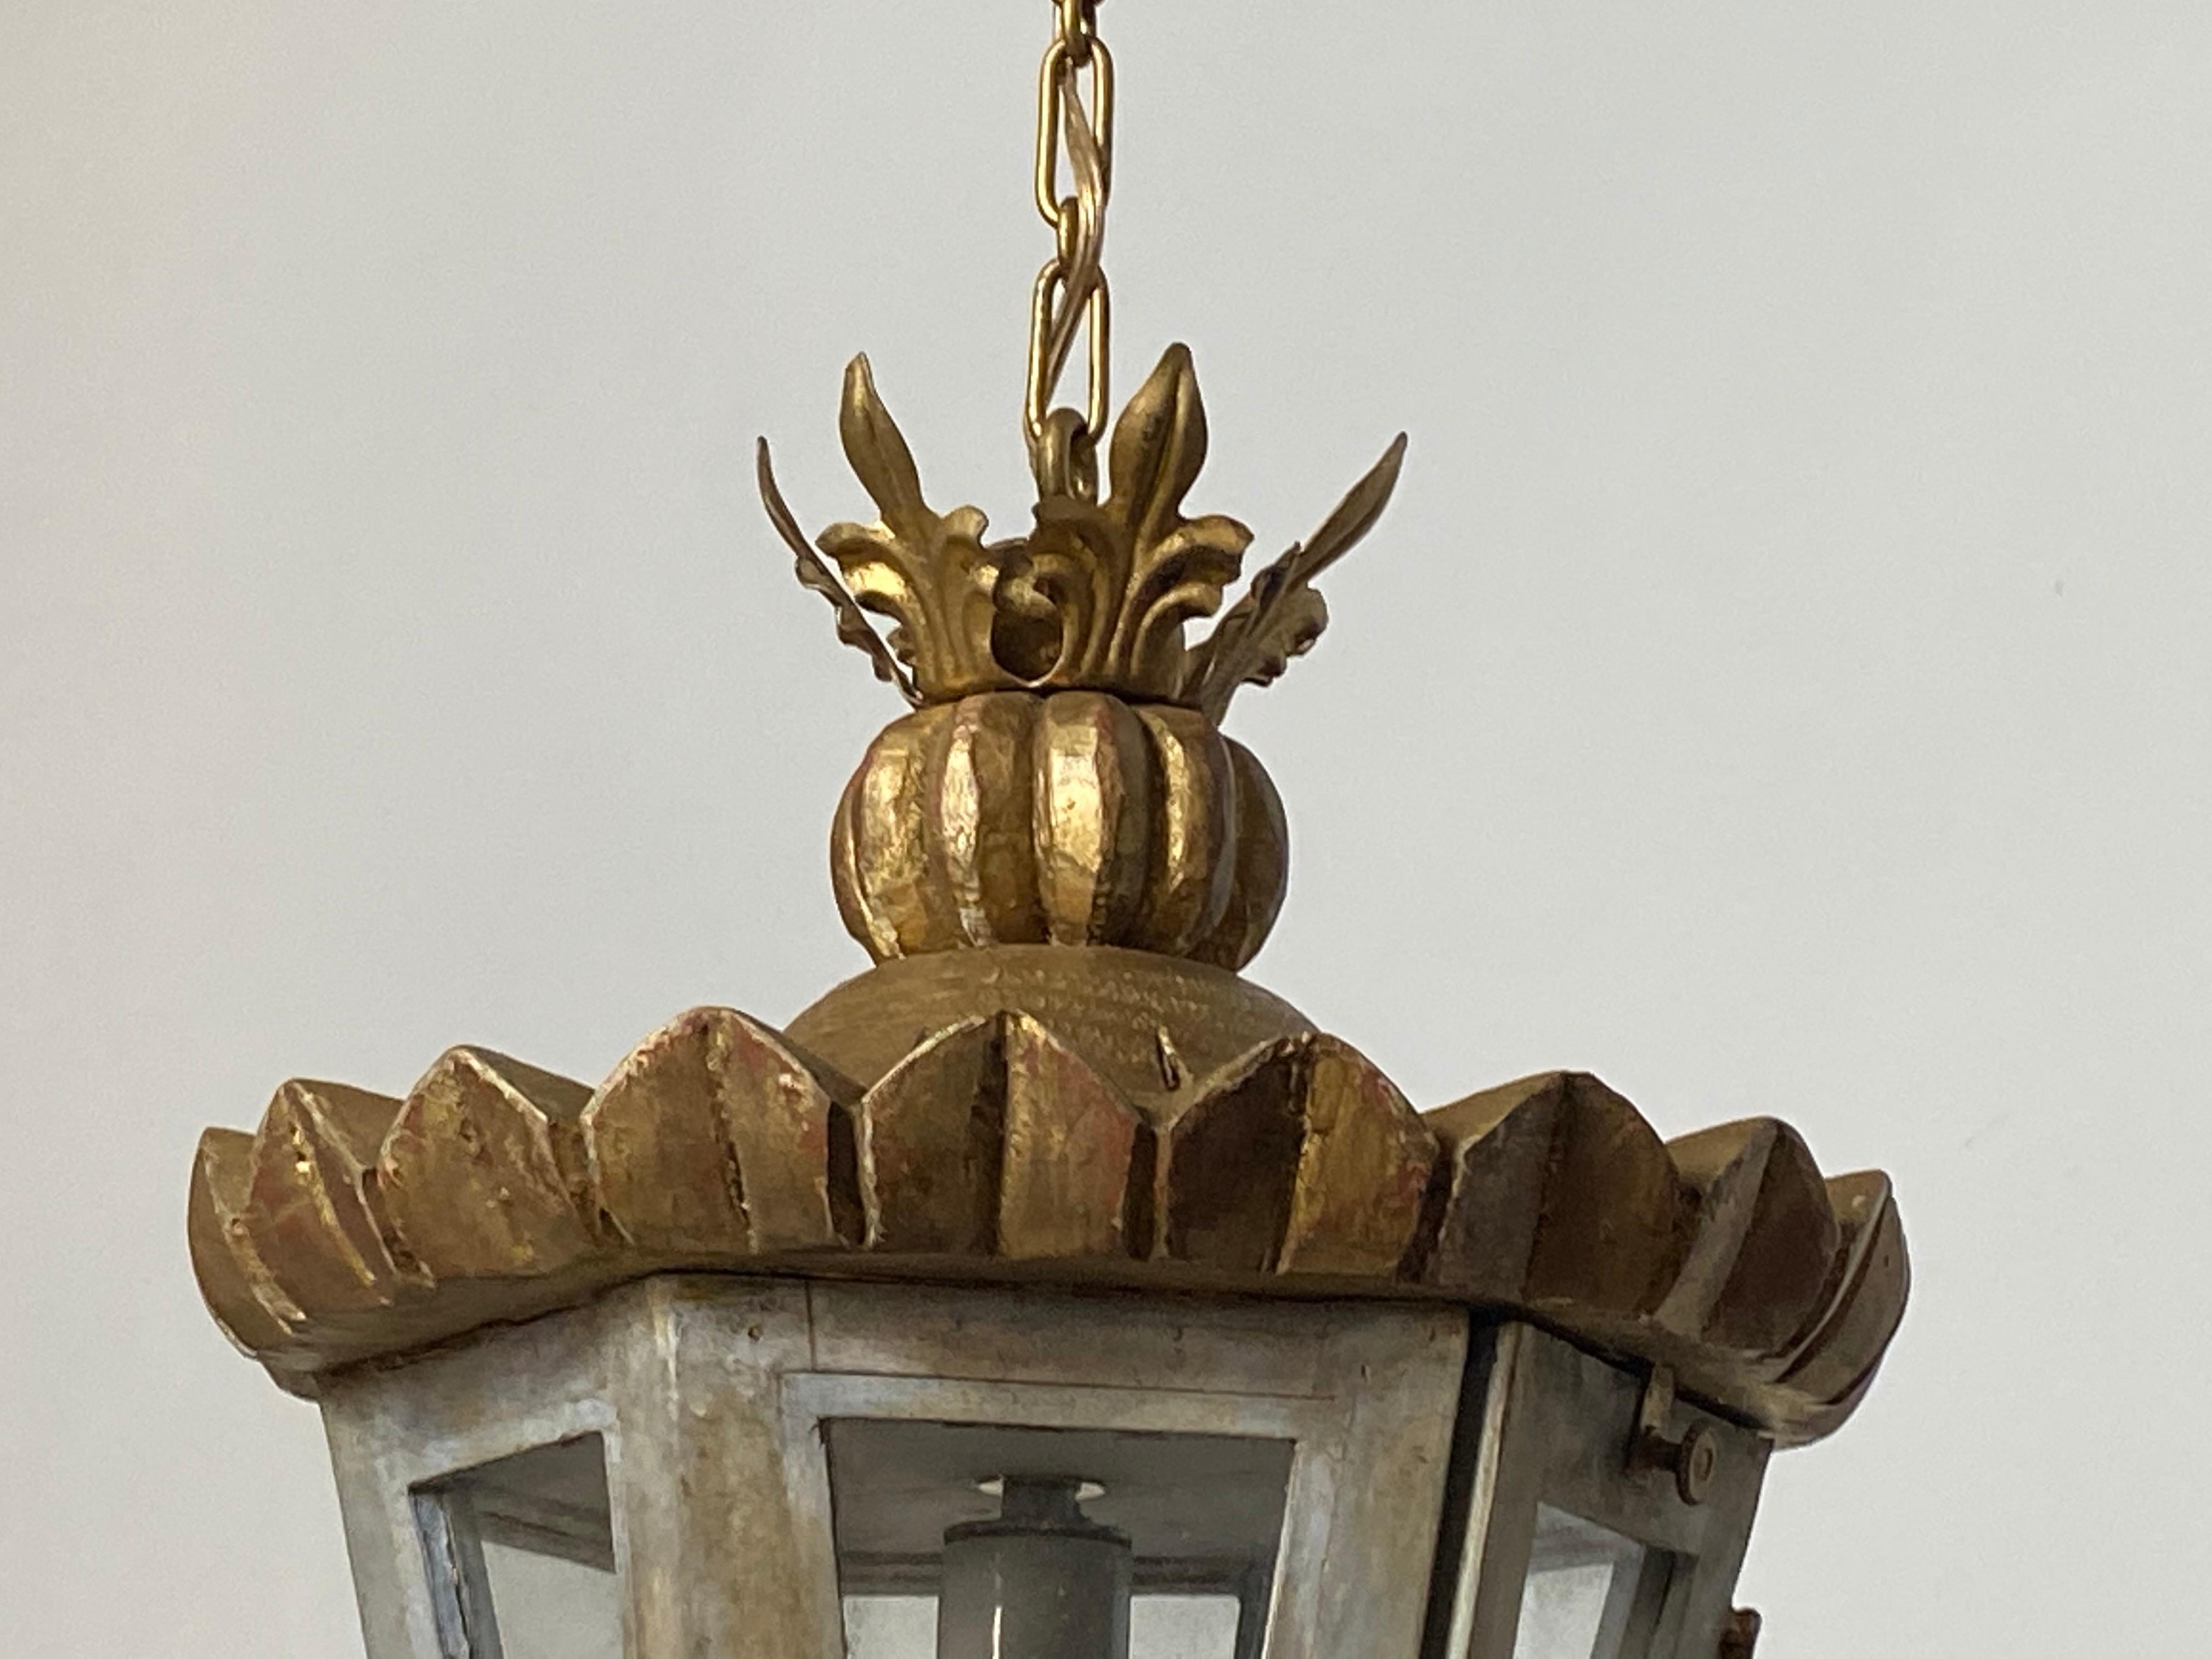 19th Century Late 19th-Early 20th Century Venetian Style Wood and Metal Hanging Lantern